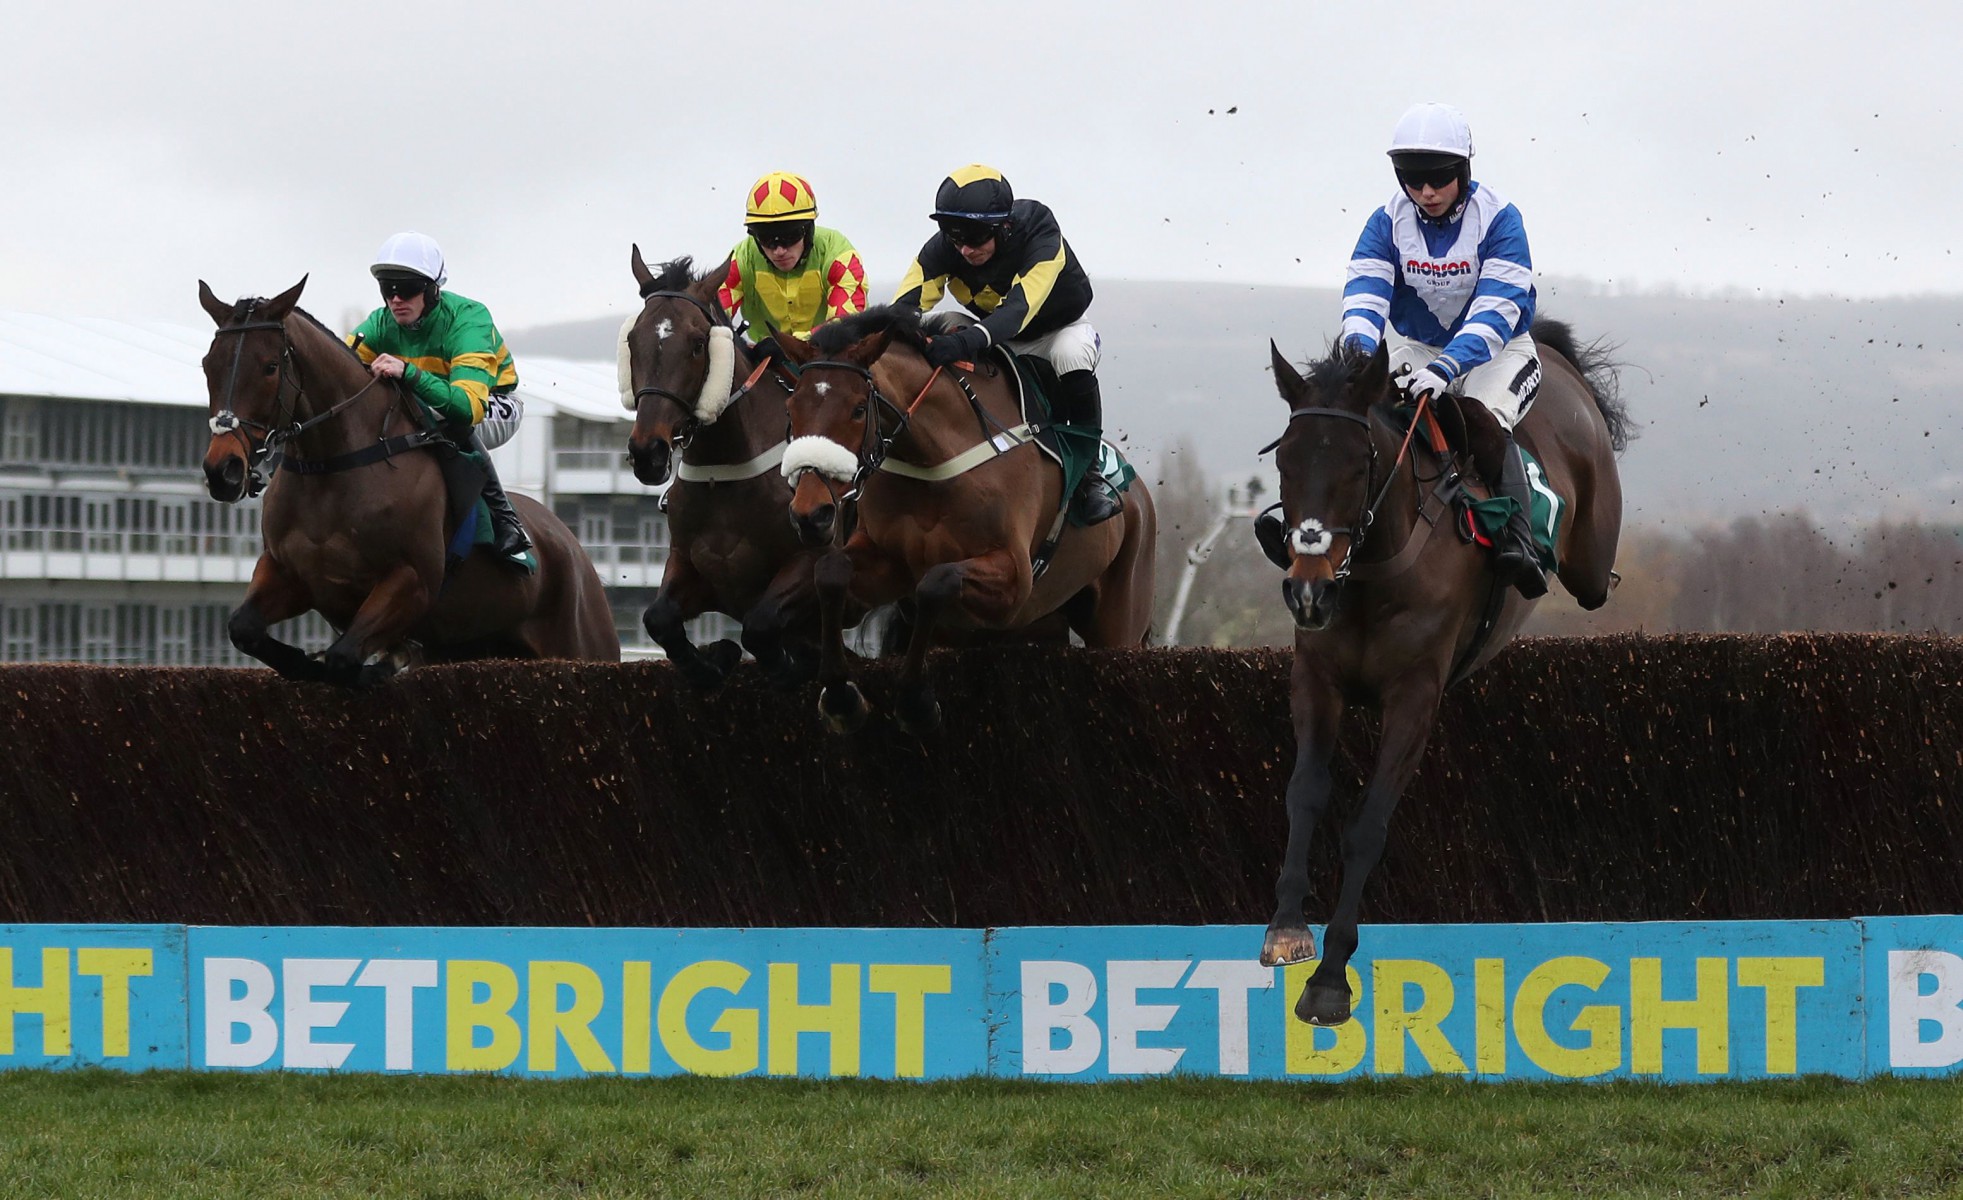 , When is the 2020 Cheltenham Festival Trials meeting, what horses are running and is there a live stream?